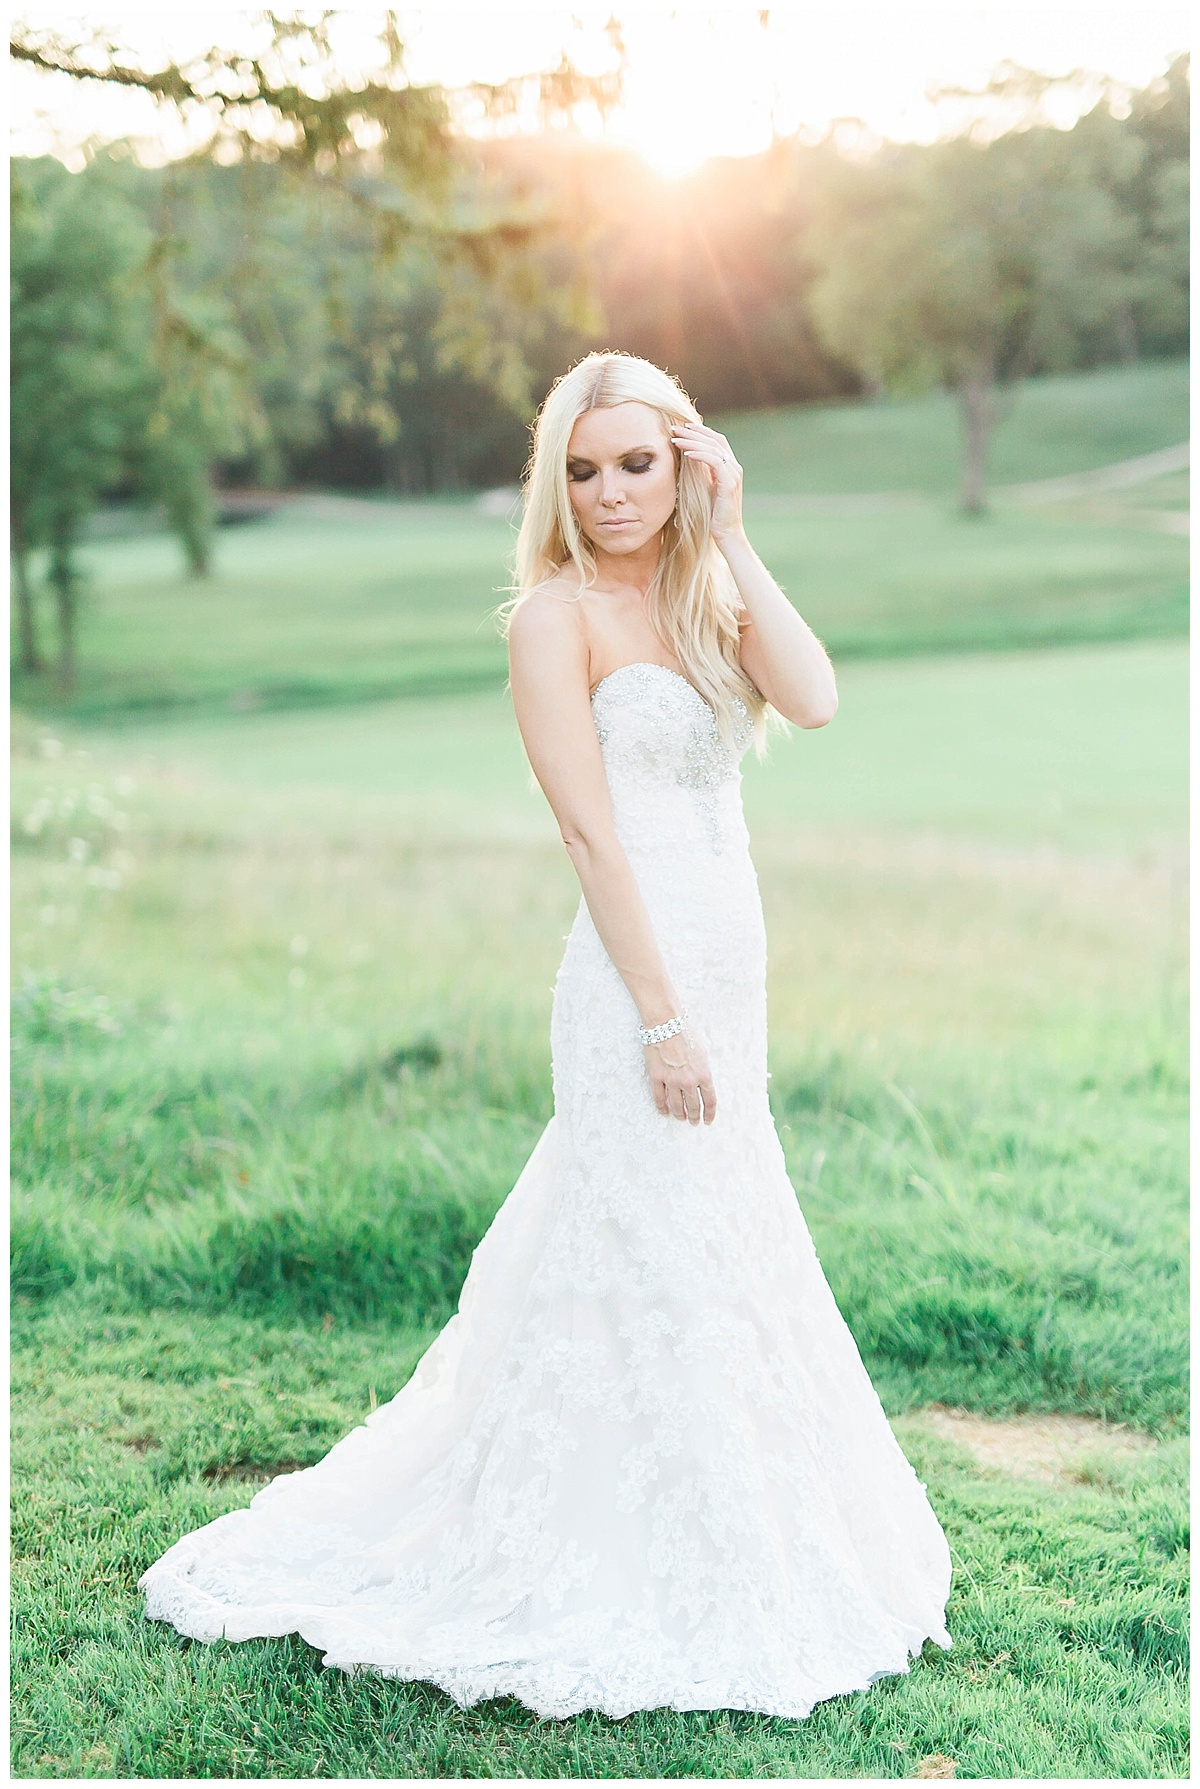 Davenport Country Club Wedding | Wedding Venues in the Quad Cities | Sarah Sunstrom Photography_0015.jpg